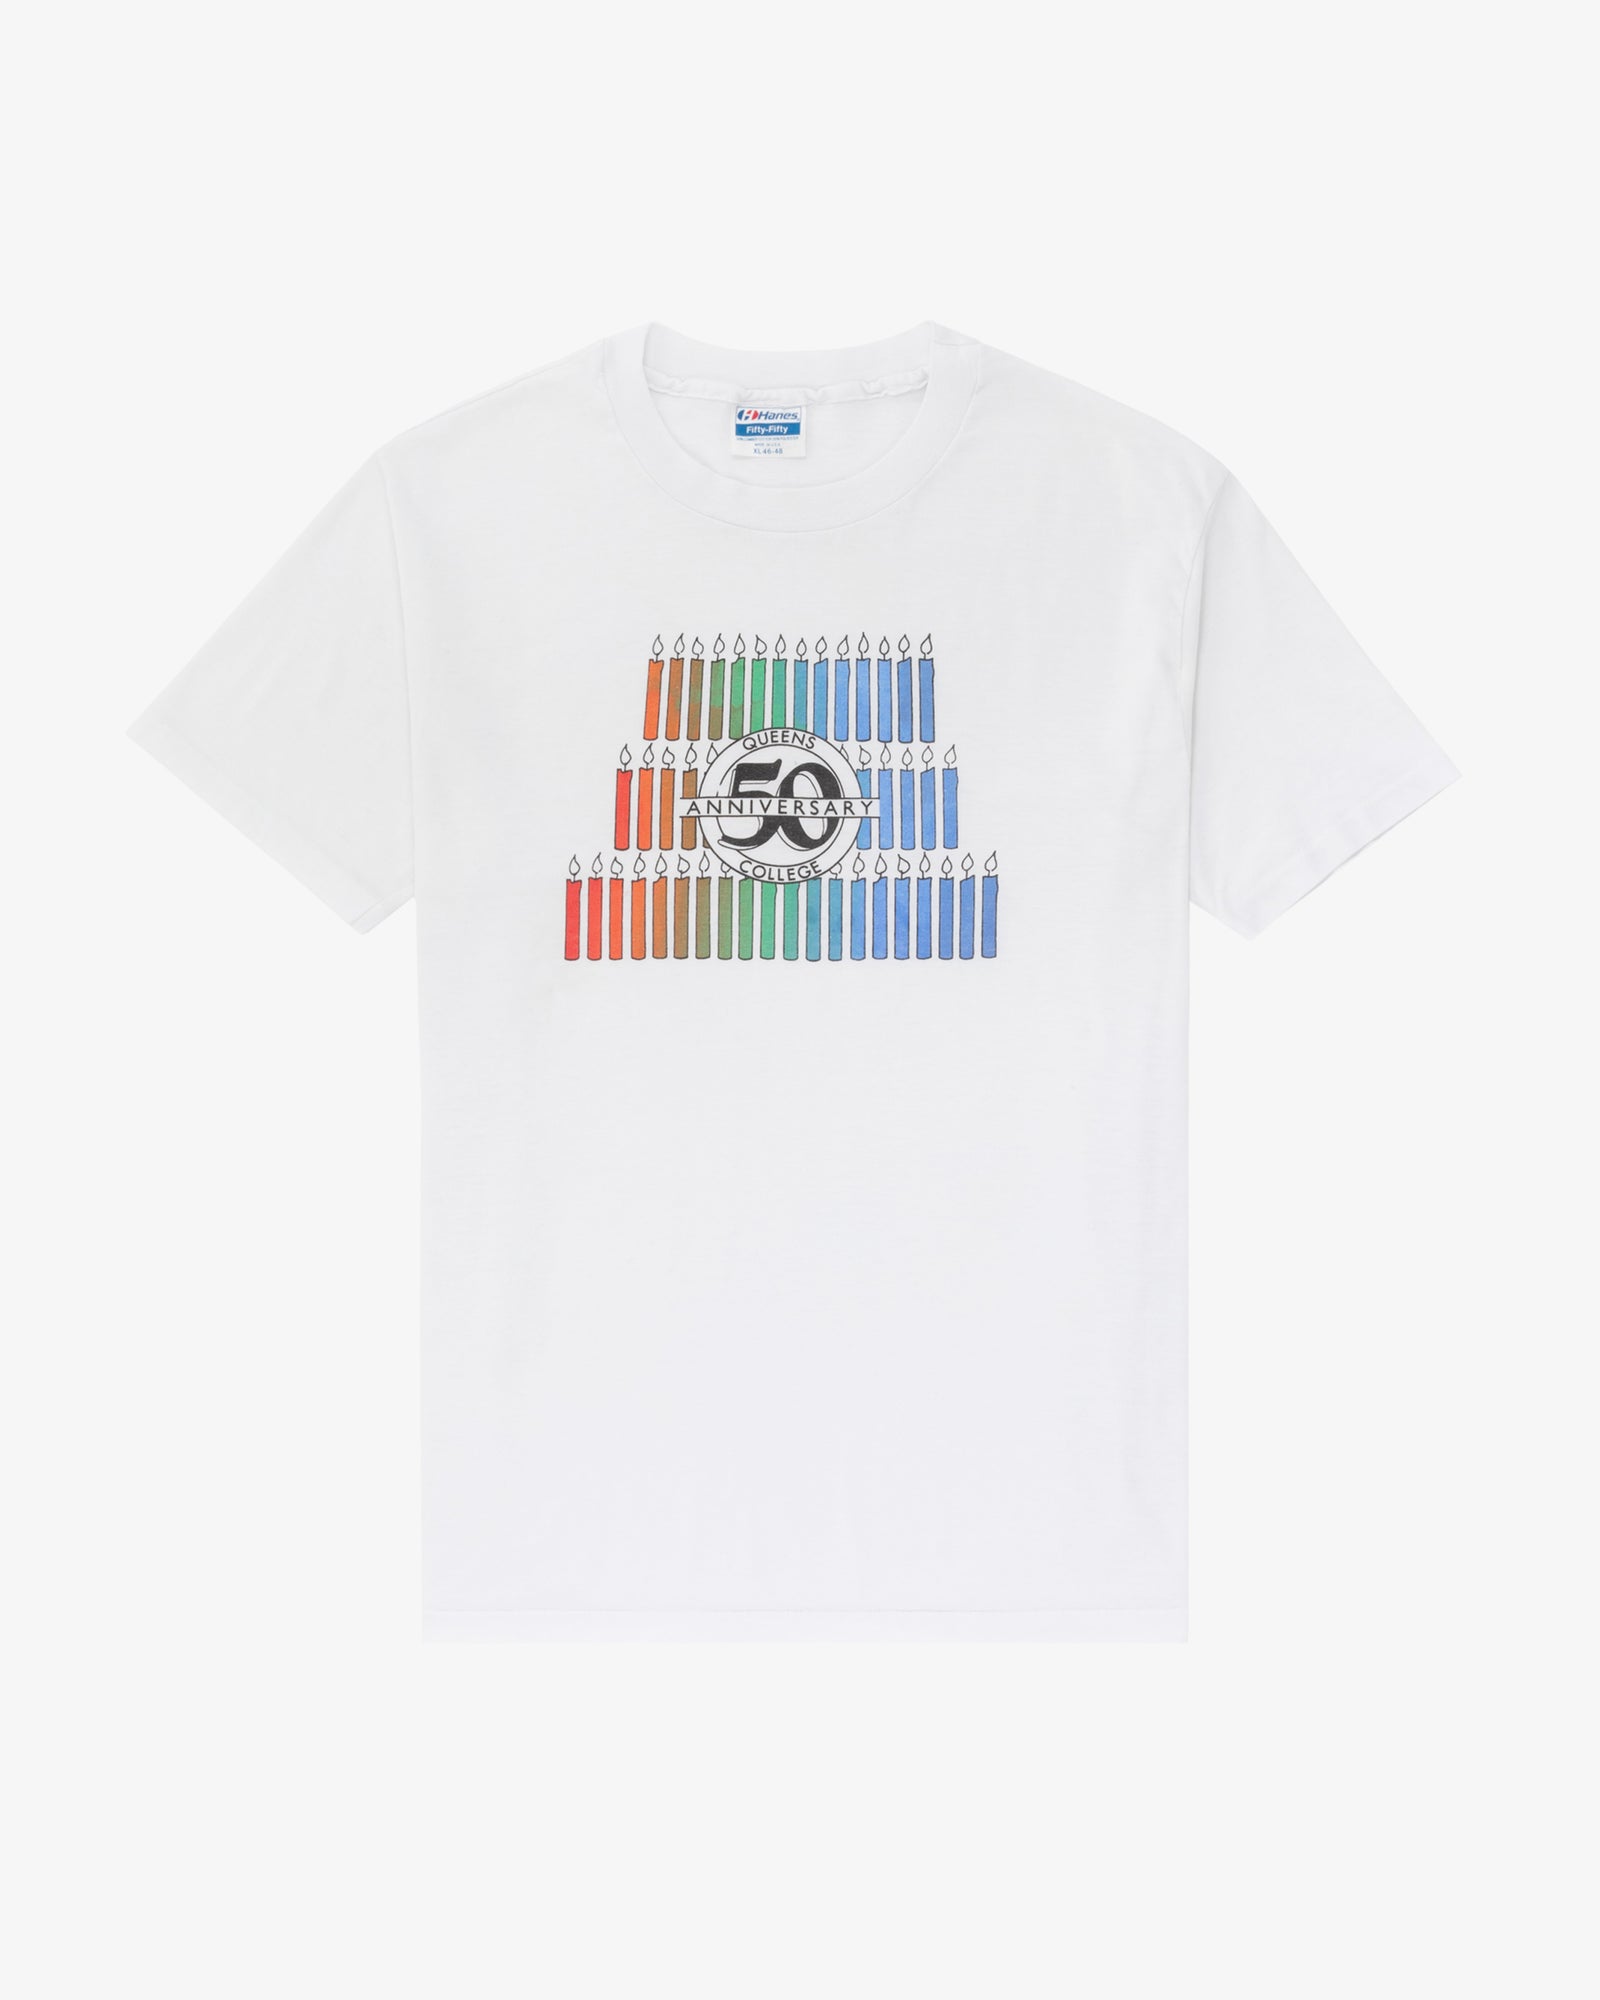 Queens College 50th Anniversary Graphic Tee